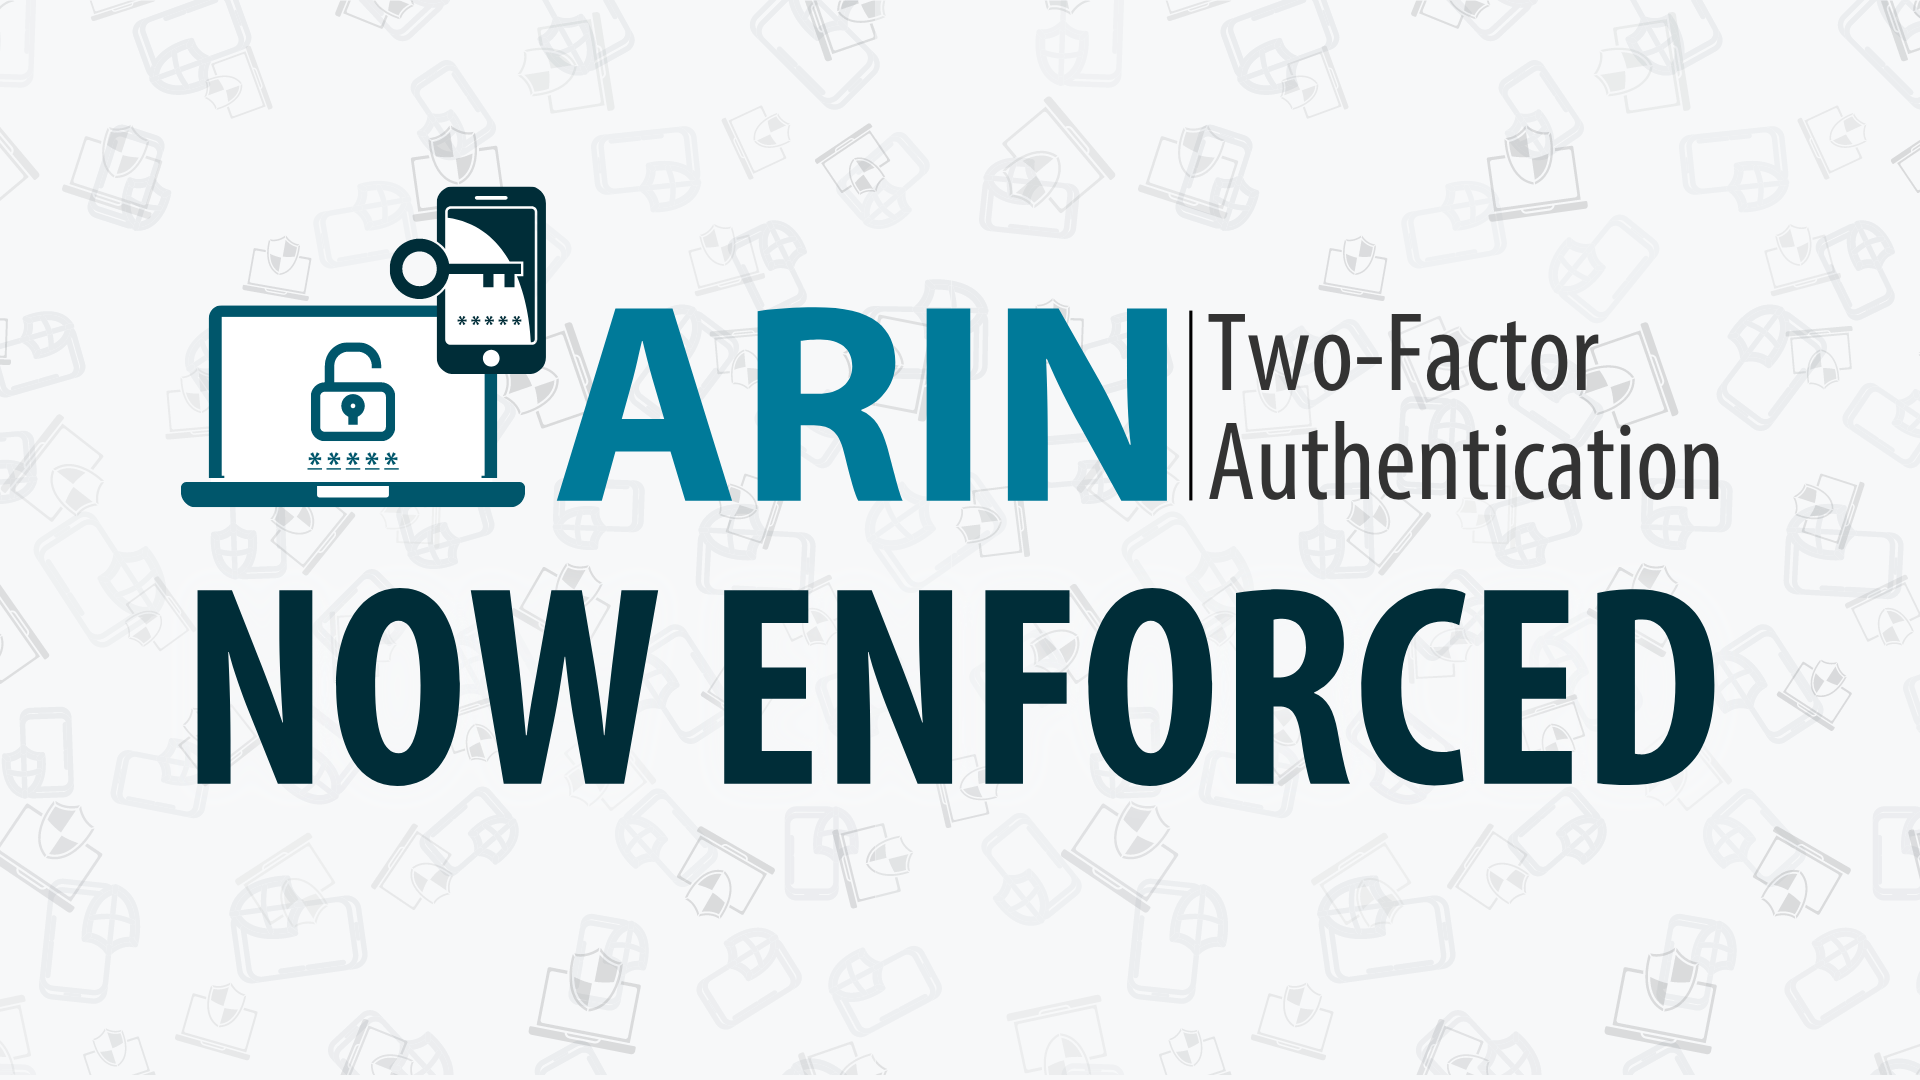 Read the blog Two-Factor Authentication Now Enforced